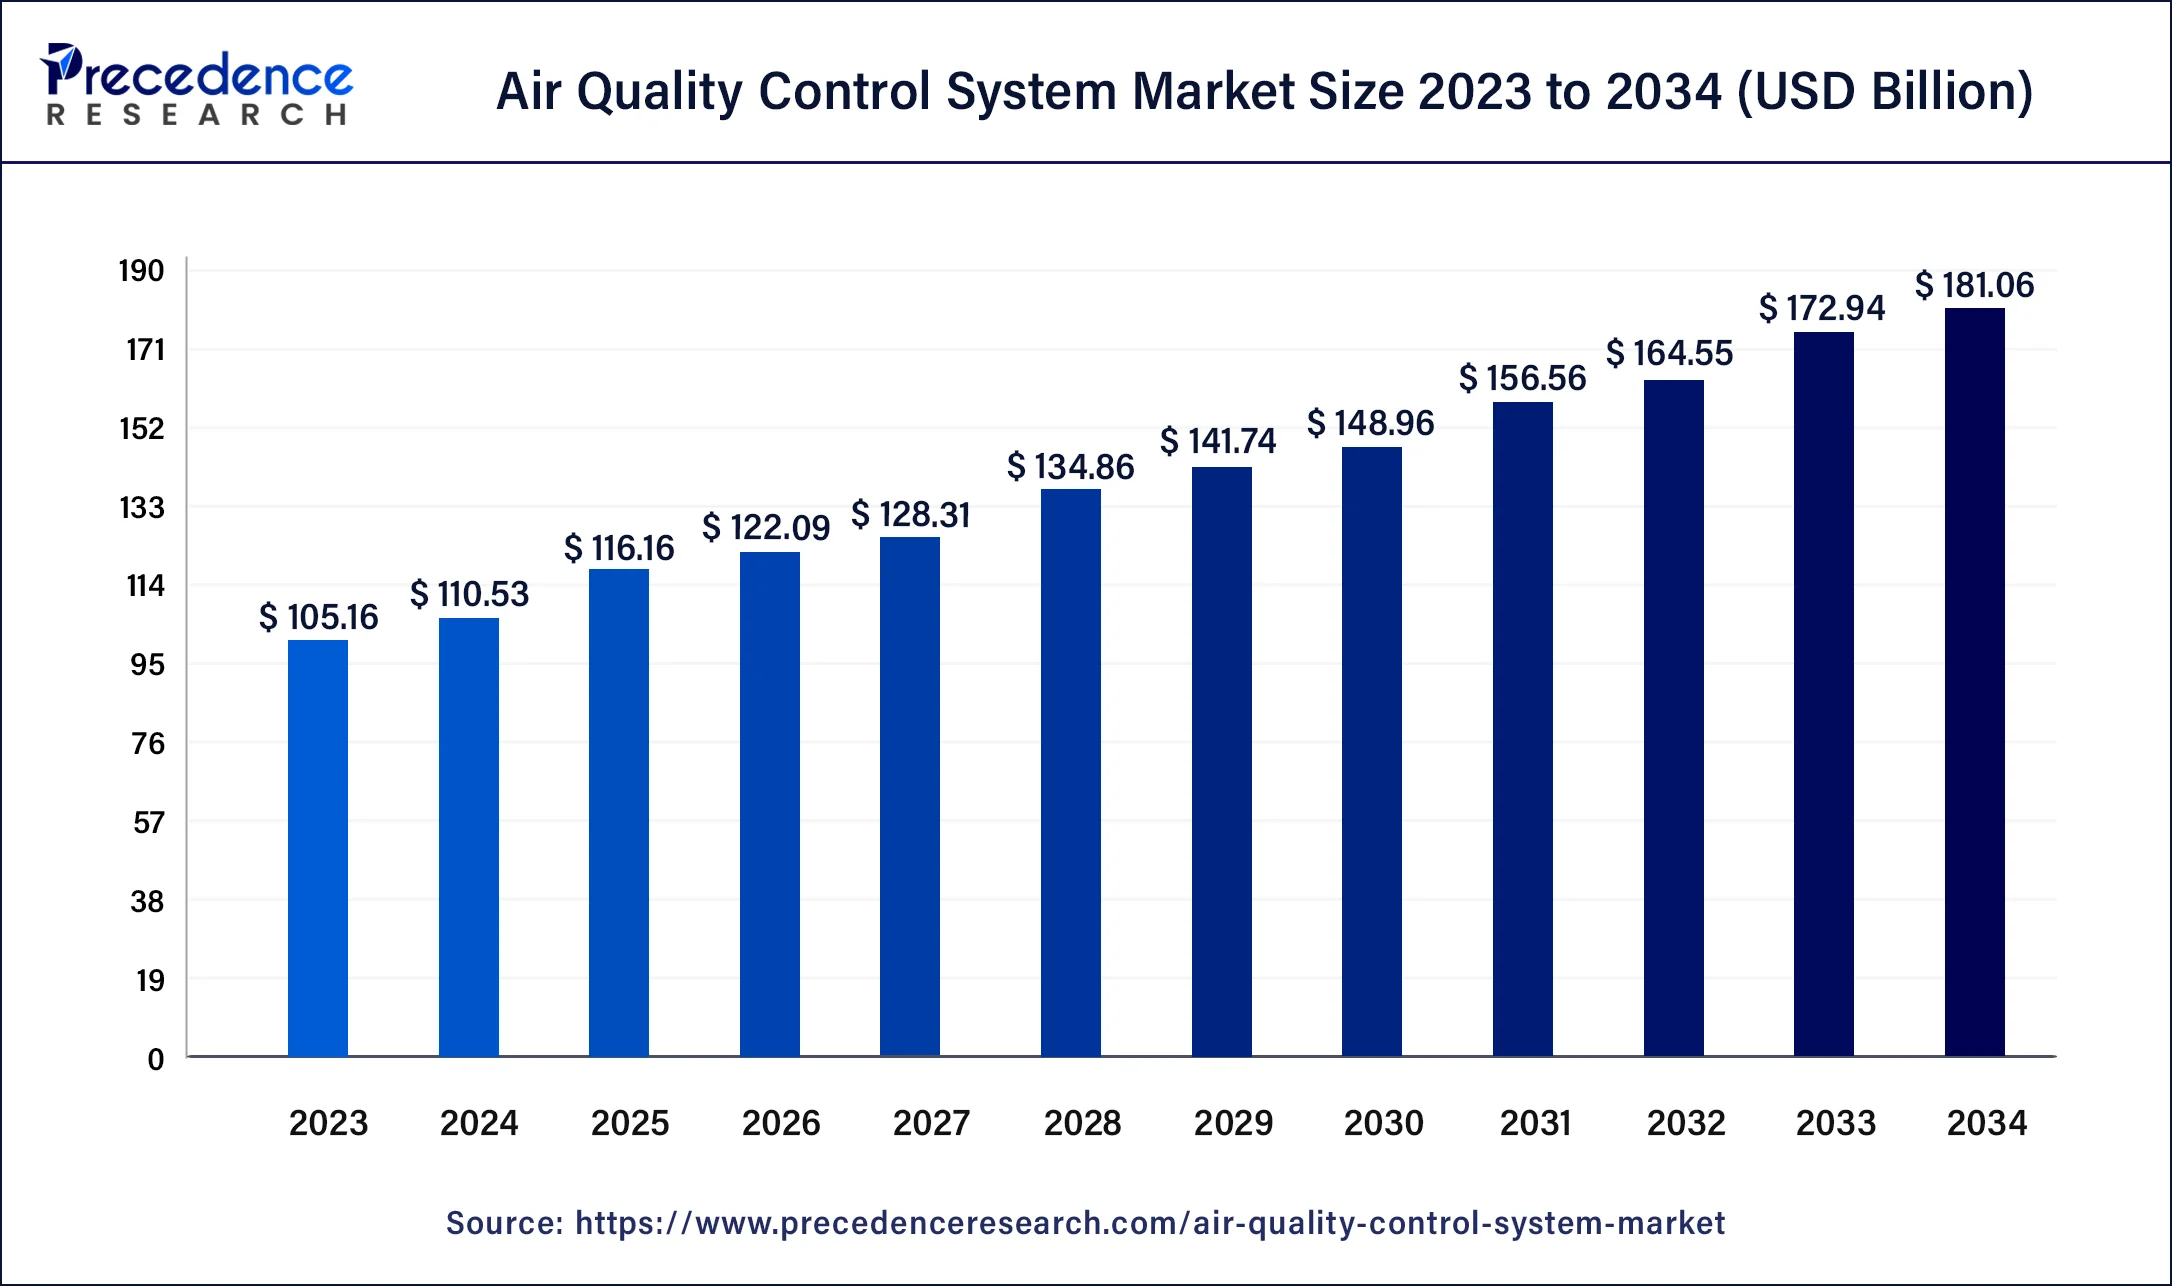 Air Quality Control System Market Size 2024 to 2034